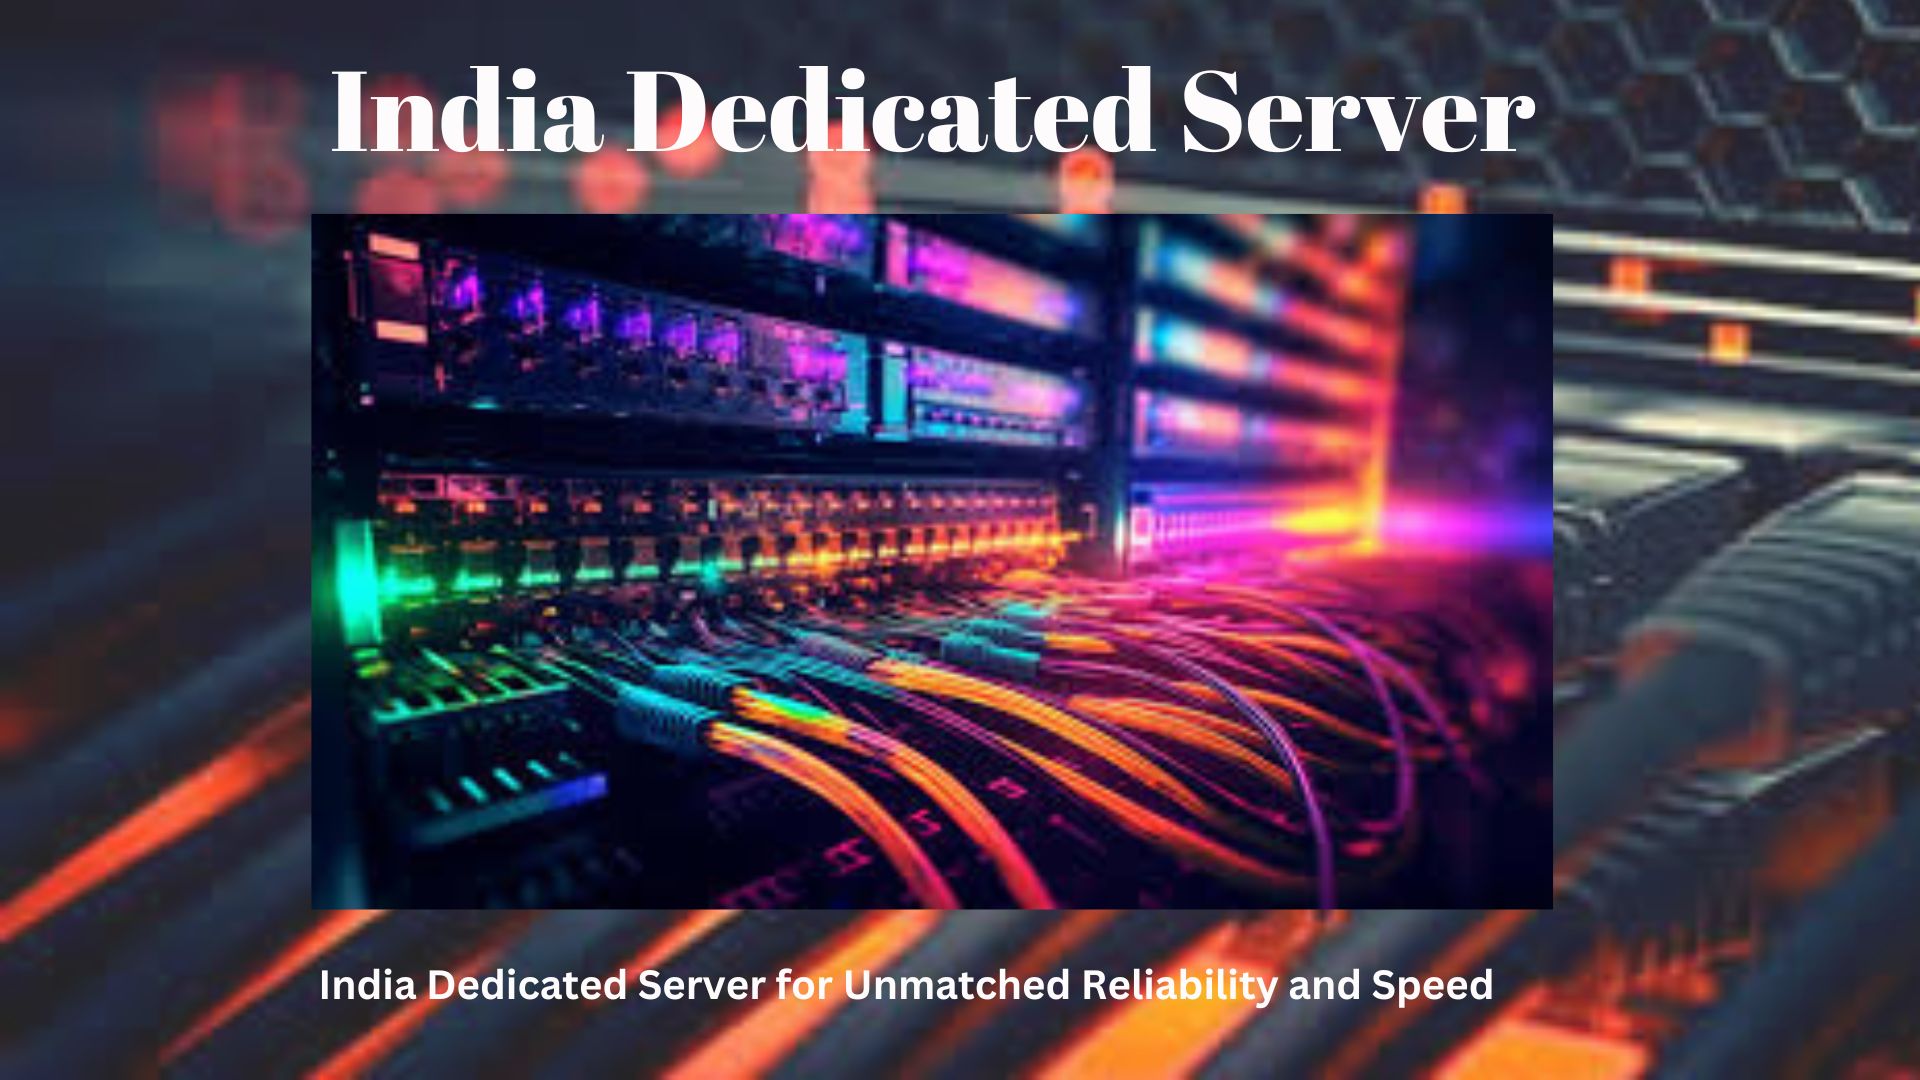 India Dedicated Server for Unmatched Reliability and Speed